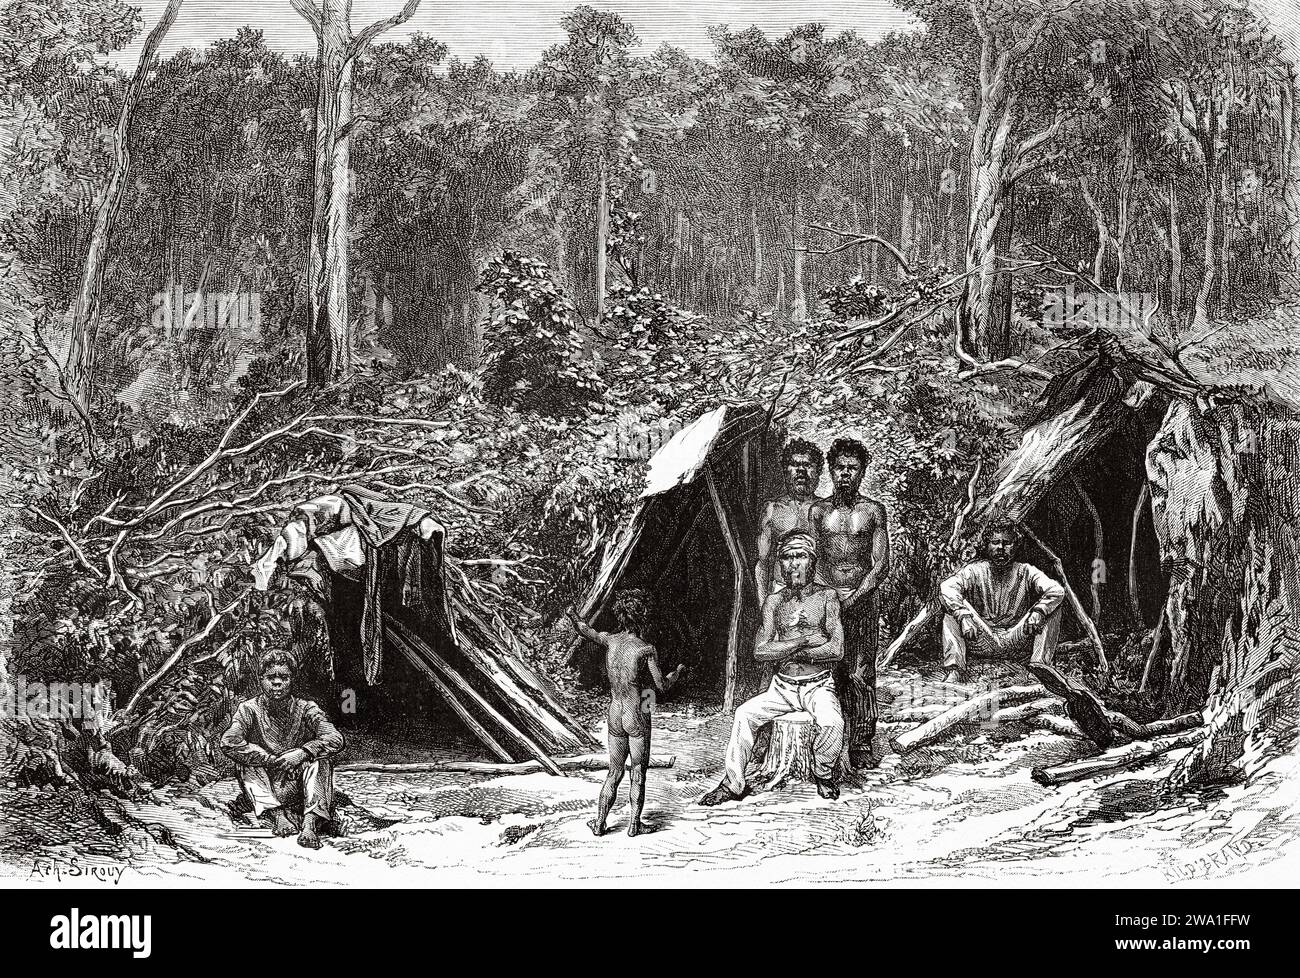 Australian native aboriginal men and women camp. Queensland, Australia. Six Months in Australia 1878 by Desire Charnay (1828 - 1915) Old 19th century engraving from Le Tour du Monde 1880 Stock Photo